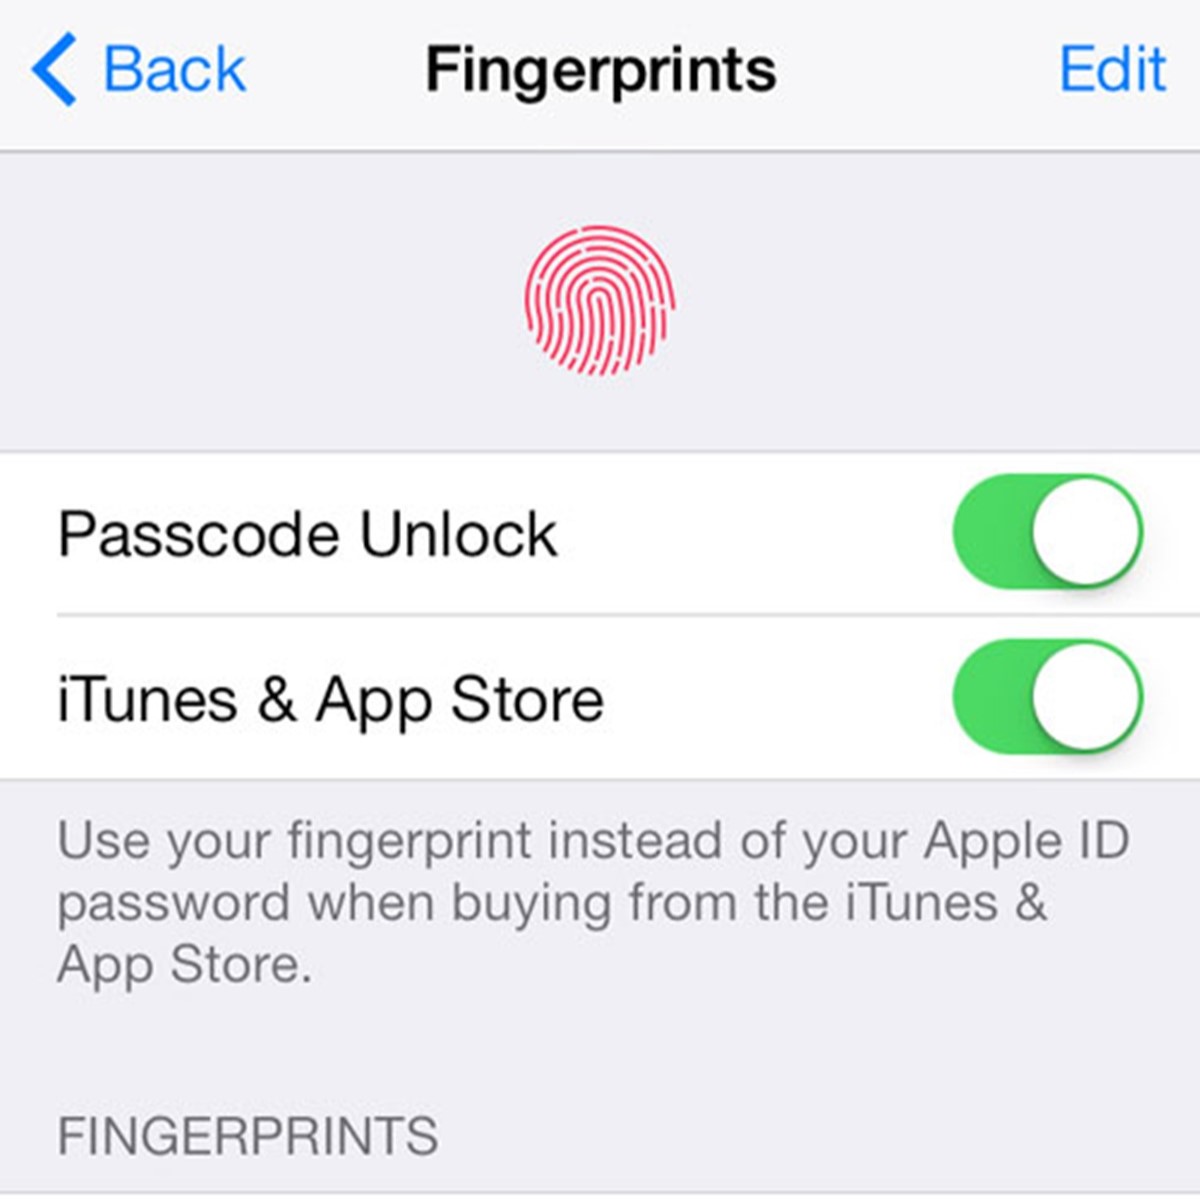 iPhone Fingerprint Scanner: How To Set Up Touch ID